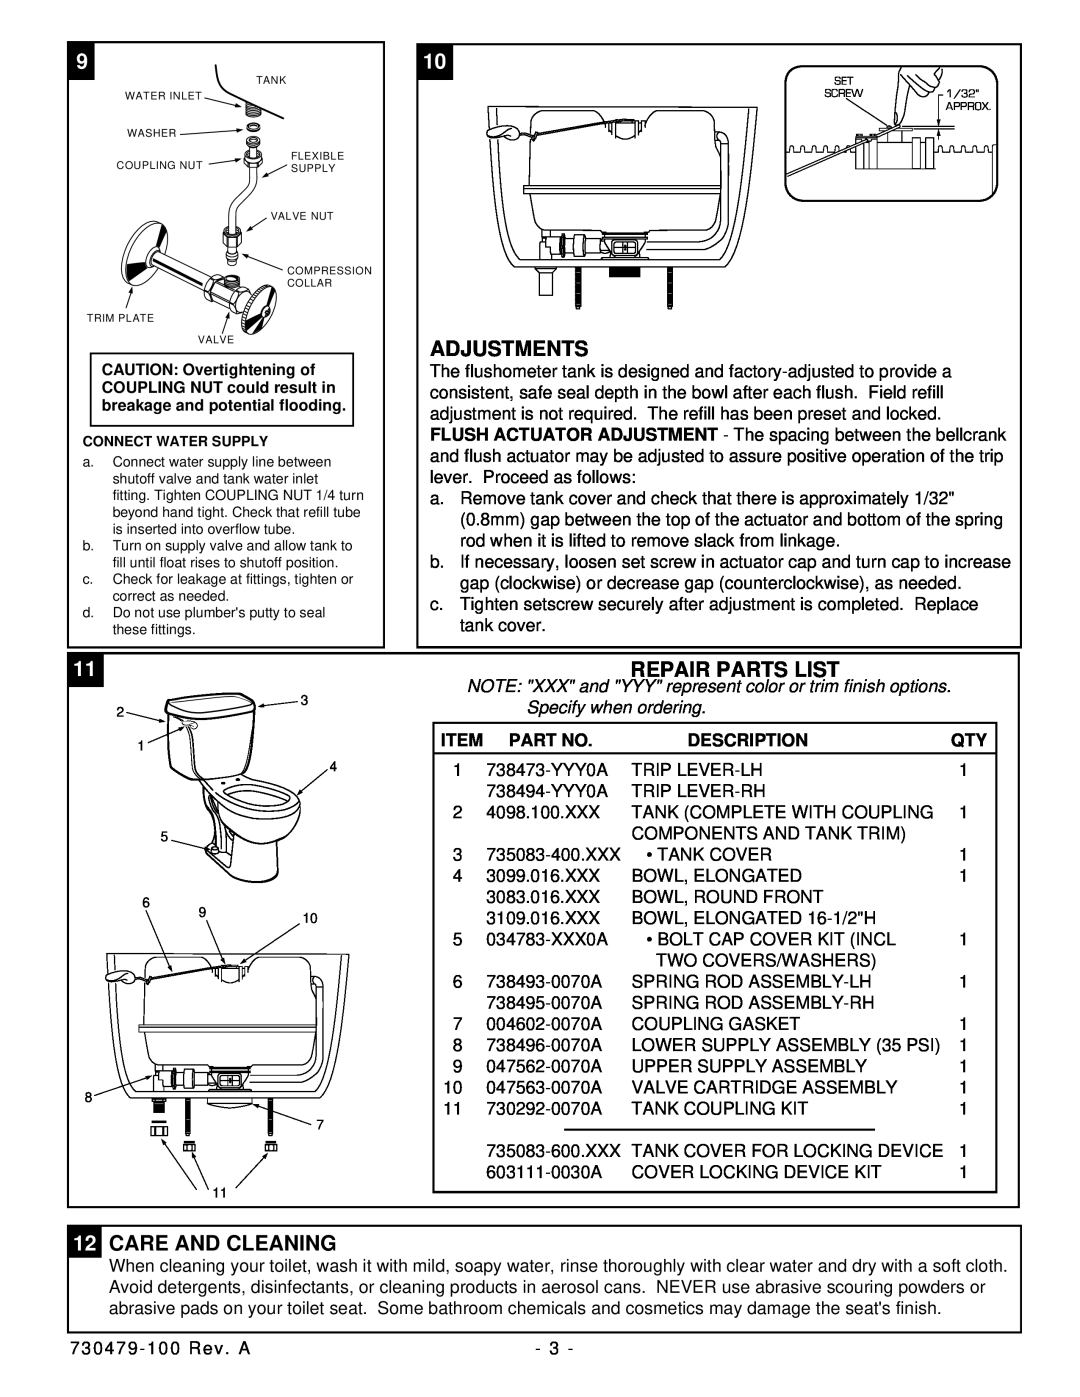 American Standard 2366, 2377 installation instructions Adjustments, Repair Parts List, 12CARE AND CLEANING, Description 